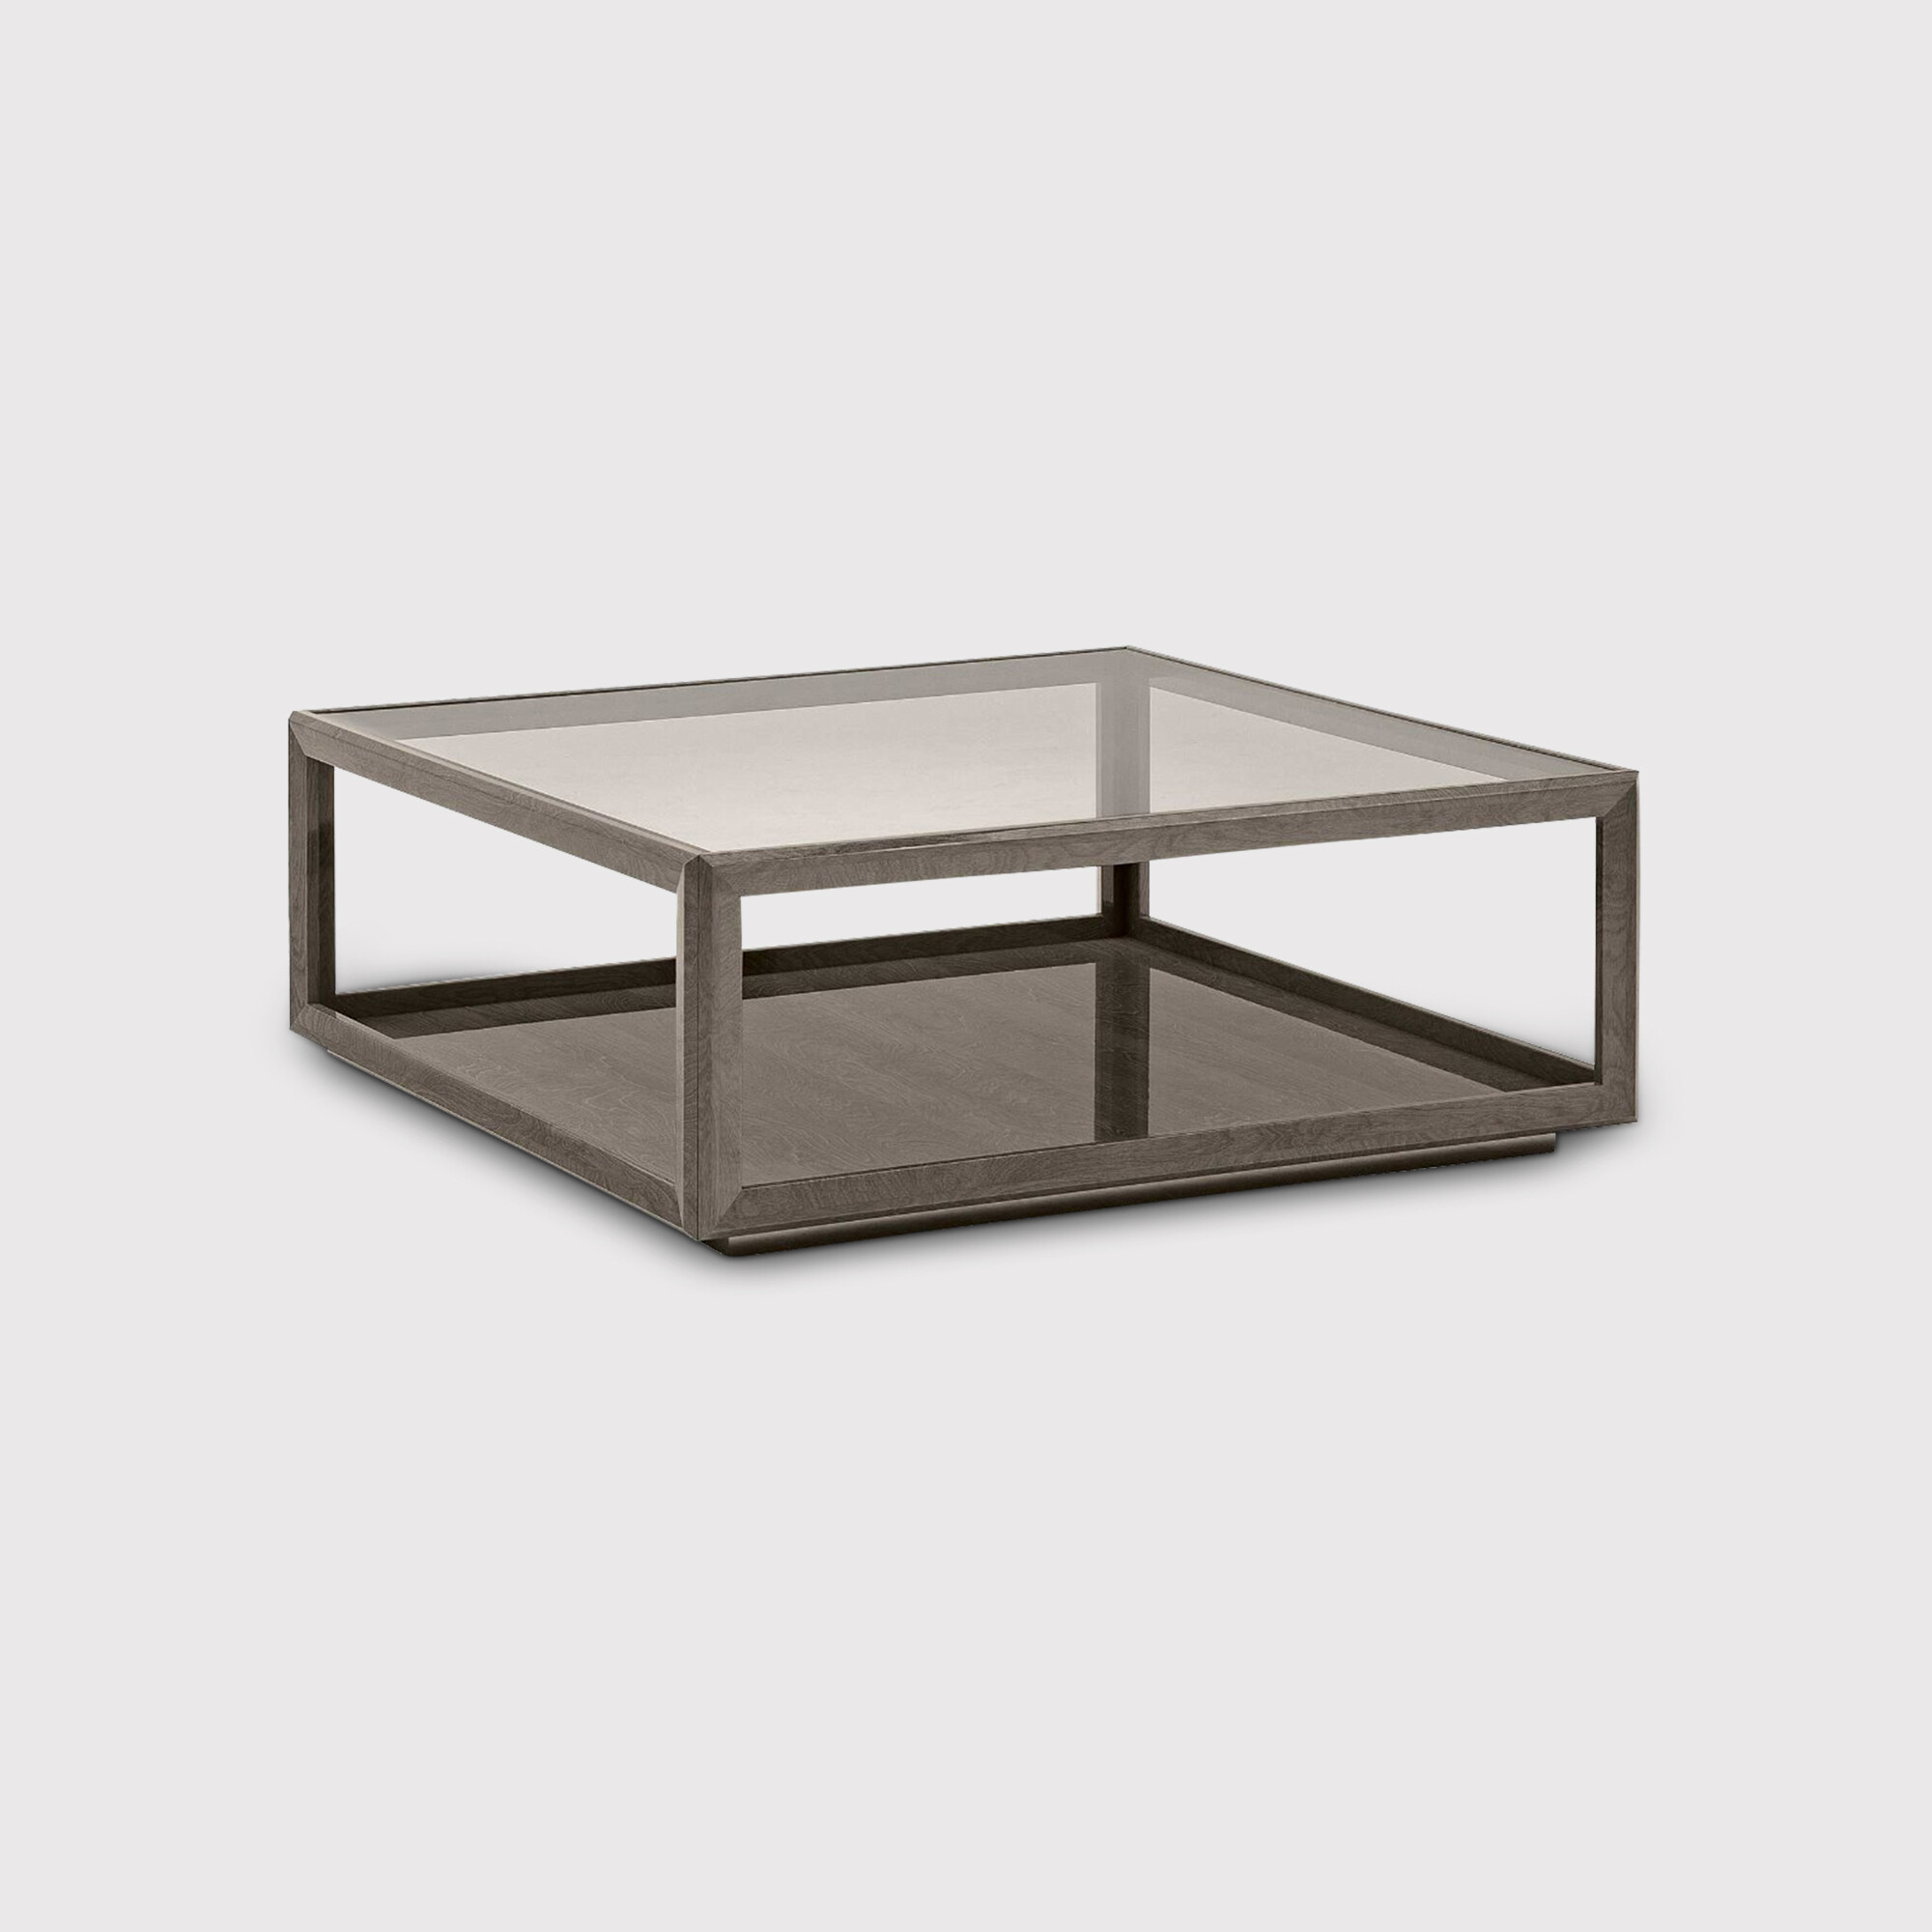 Vinci Square Coffee Table, Grey Wood | Barker & Stonehouse